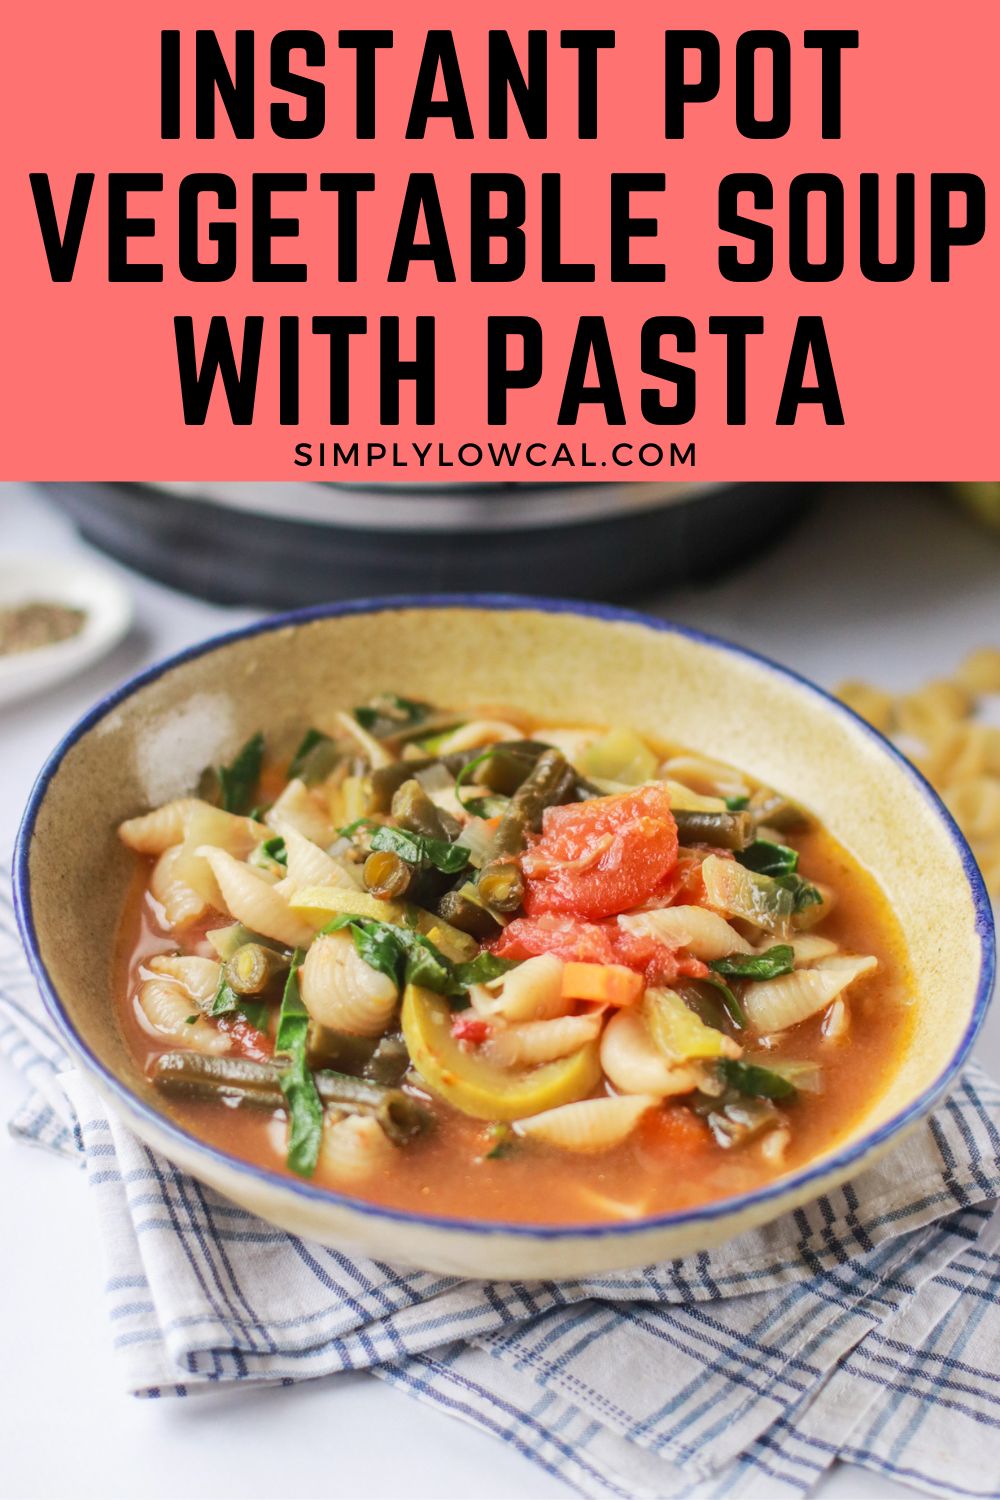 Instant Pot Vegetable Soup With Pasta - Simply Low Cal